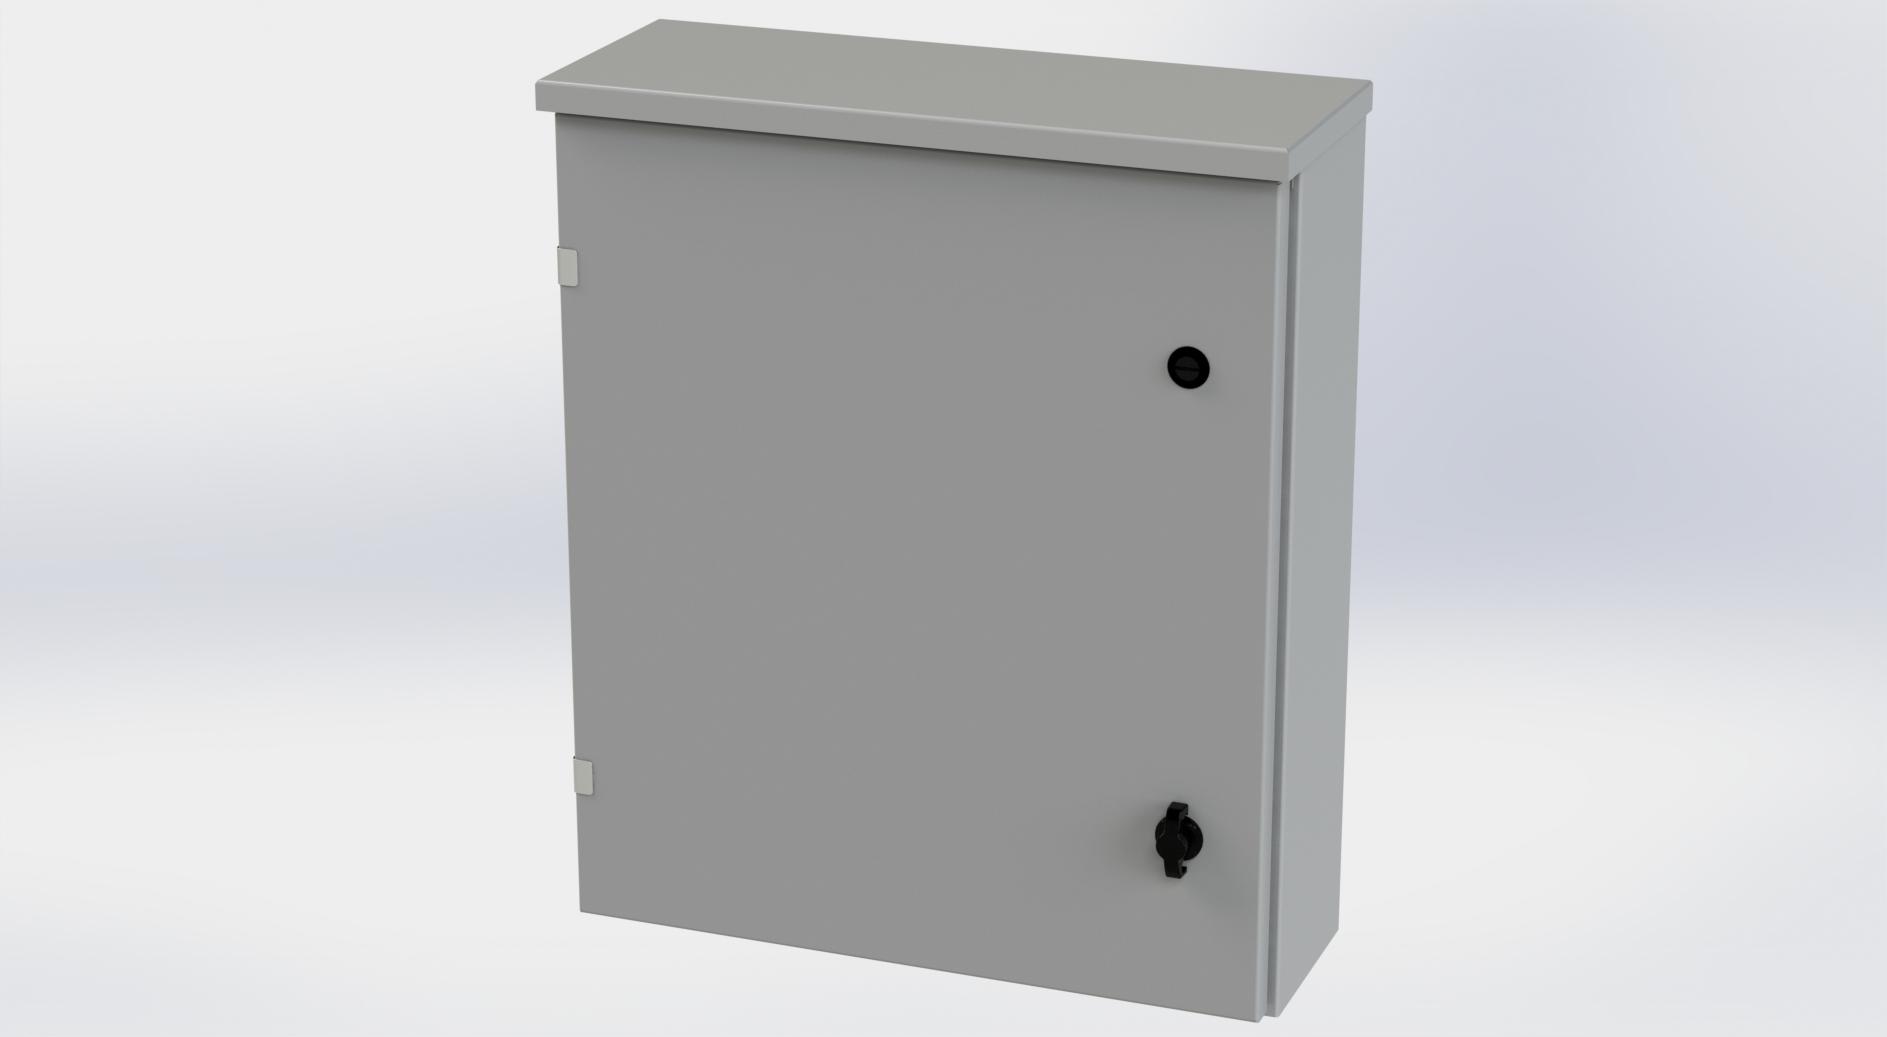 Saginaw Control SCE-24R2006LP Type-3R Hinged Cover Enclosure, Height:24.00", Width:20.00", Depth:6.00", ANSI-61 gray powder coating inside and out. Optional sub-panels are powder coated white.